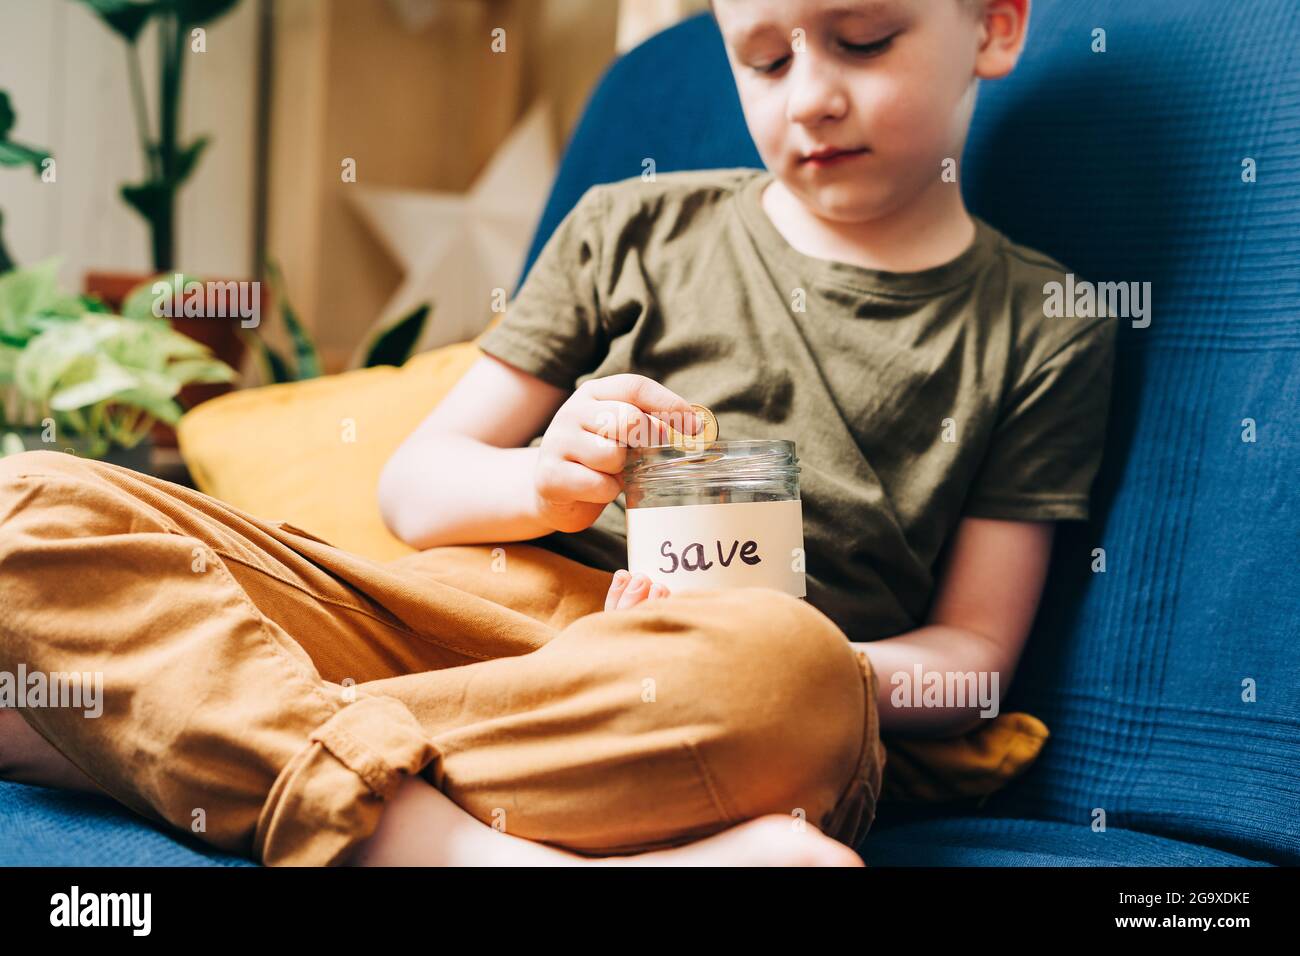 Close up of Little child kid boy hands grabbing and putting stack coins in to glass jar with save label. Donation, saving money, charity, family Stock Photo